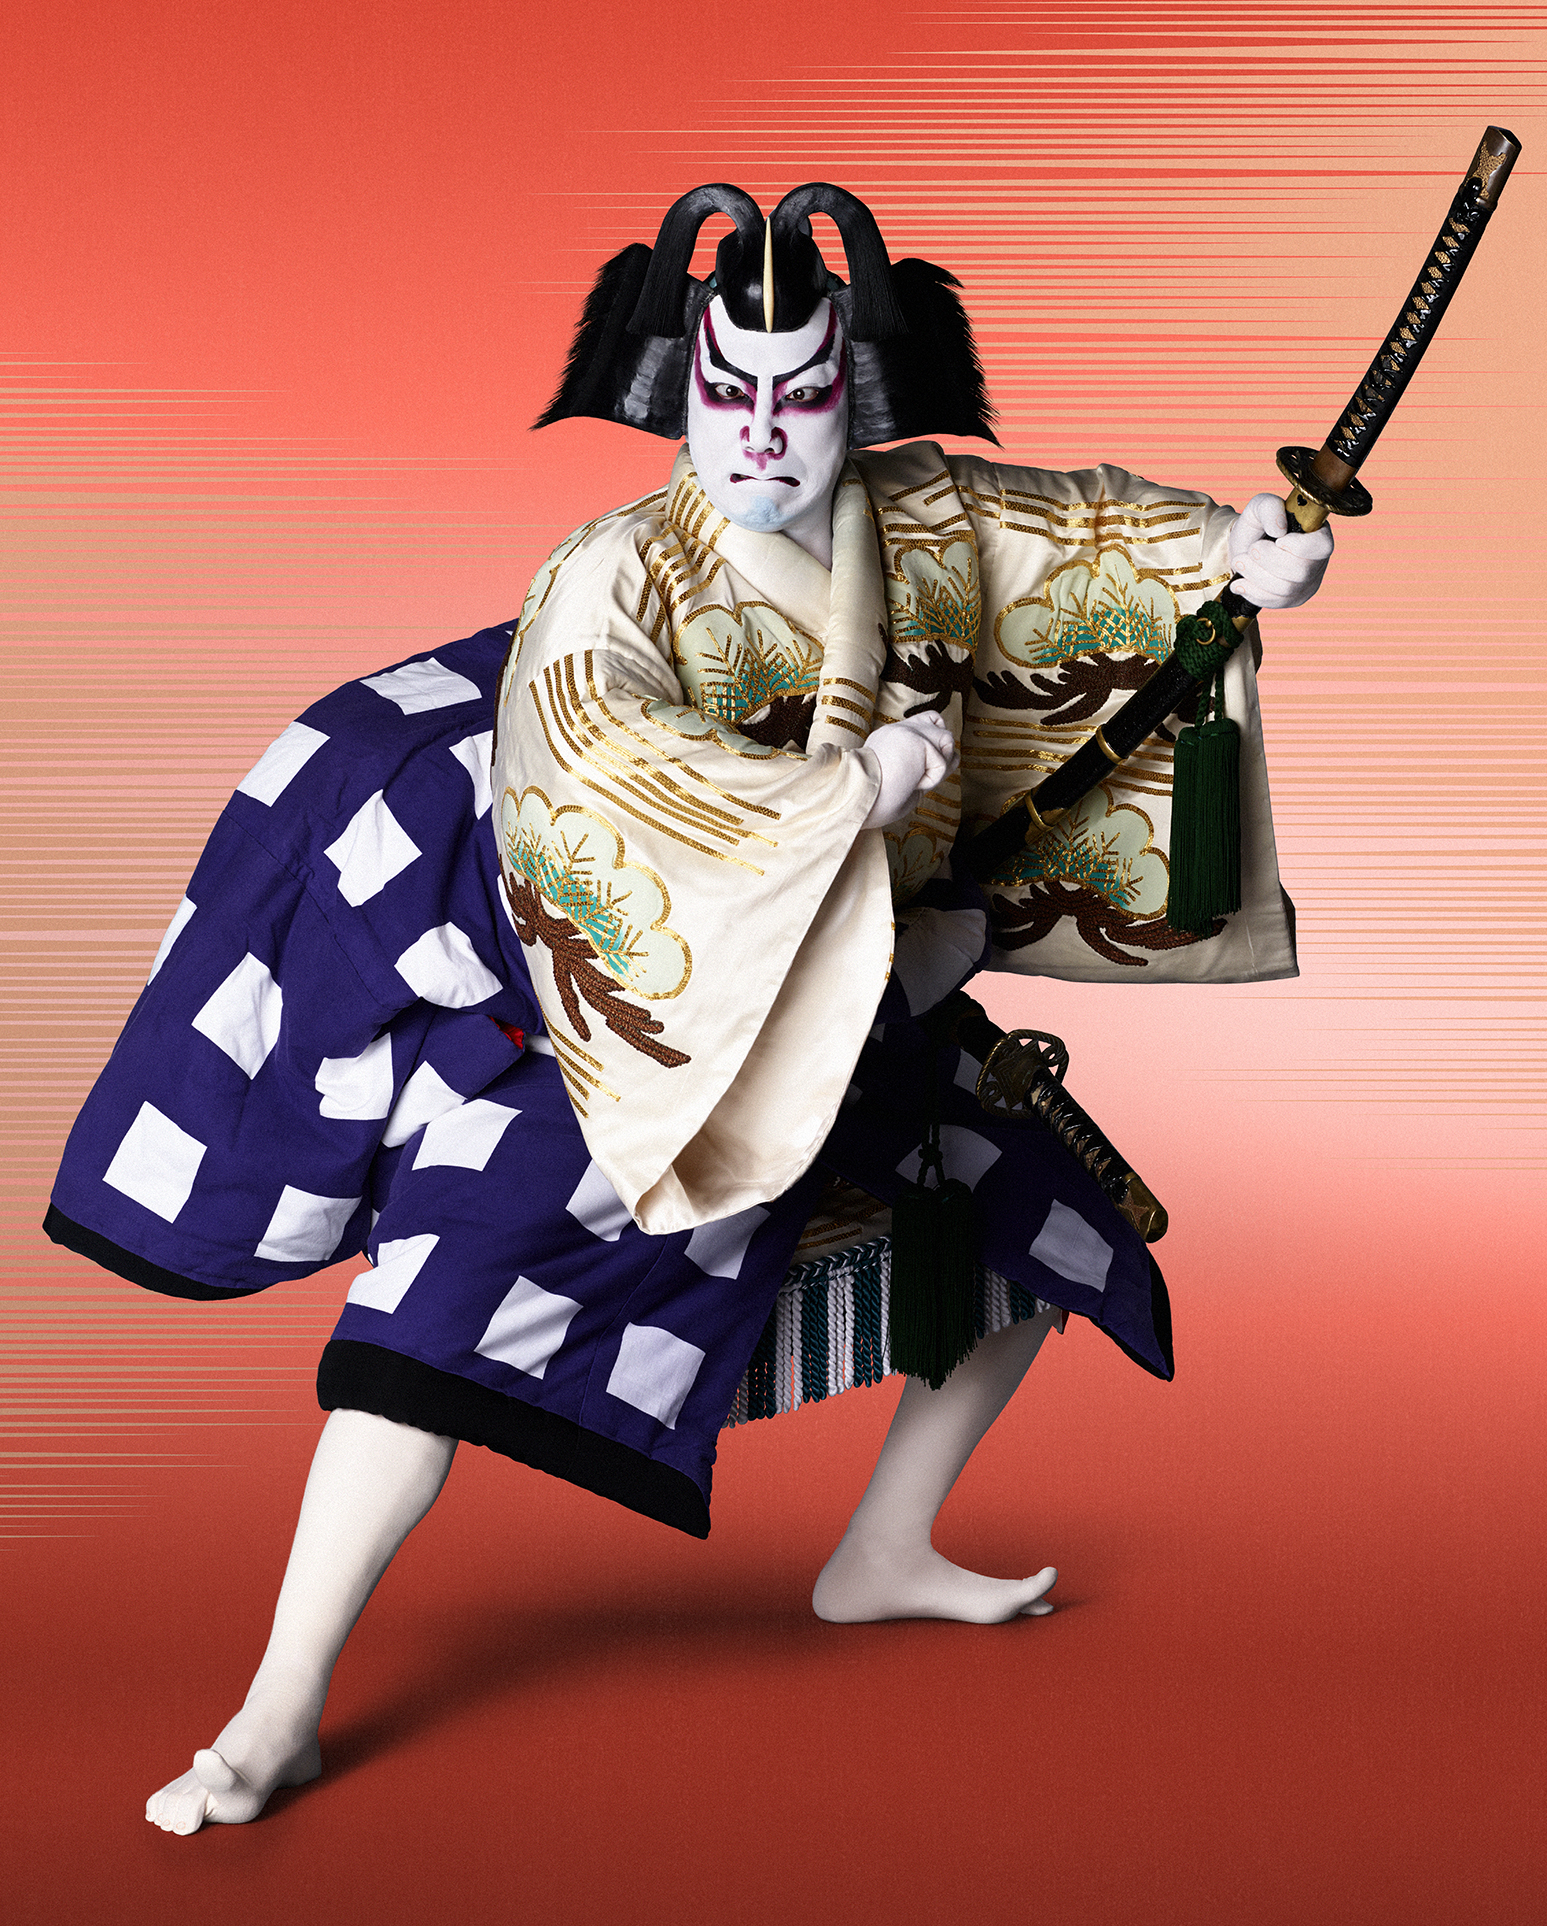 A photo of a kabuki theatre performer. He is dressed in a traditional costume against a red backdrop, adopting a dramatic pose, and holding a sword.